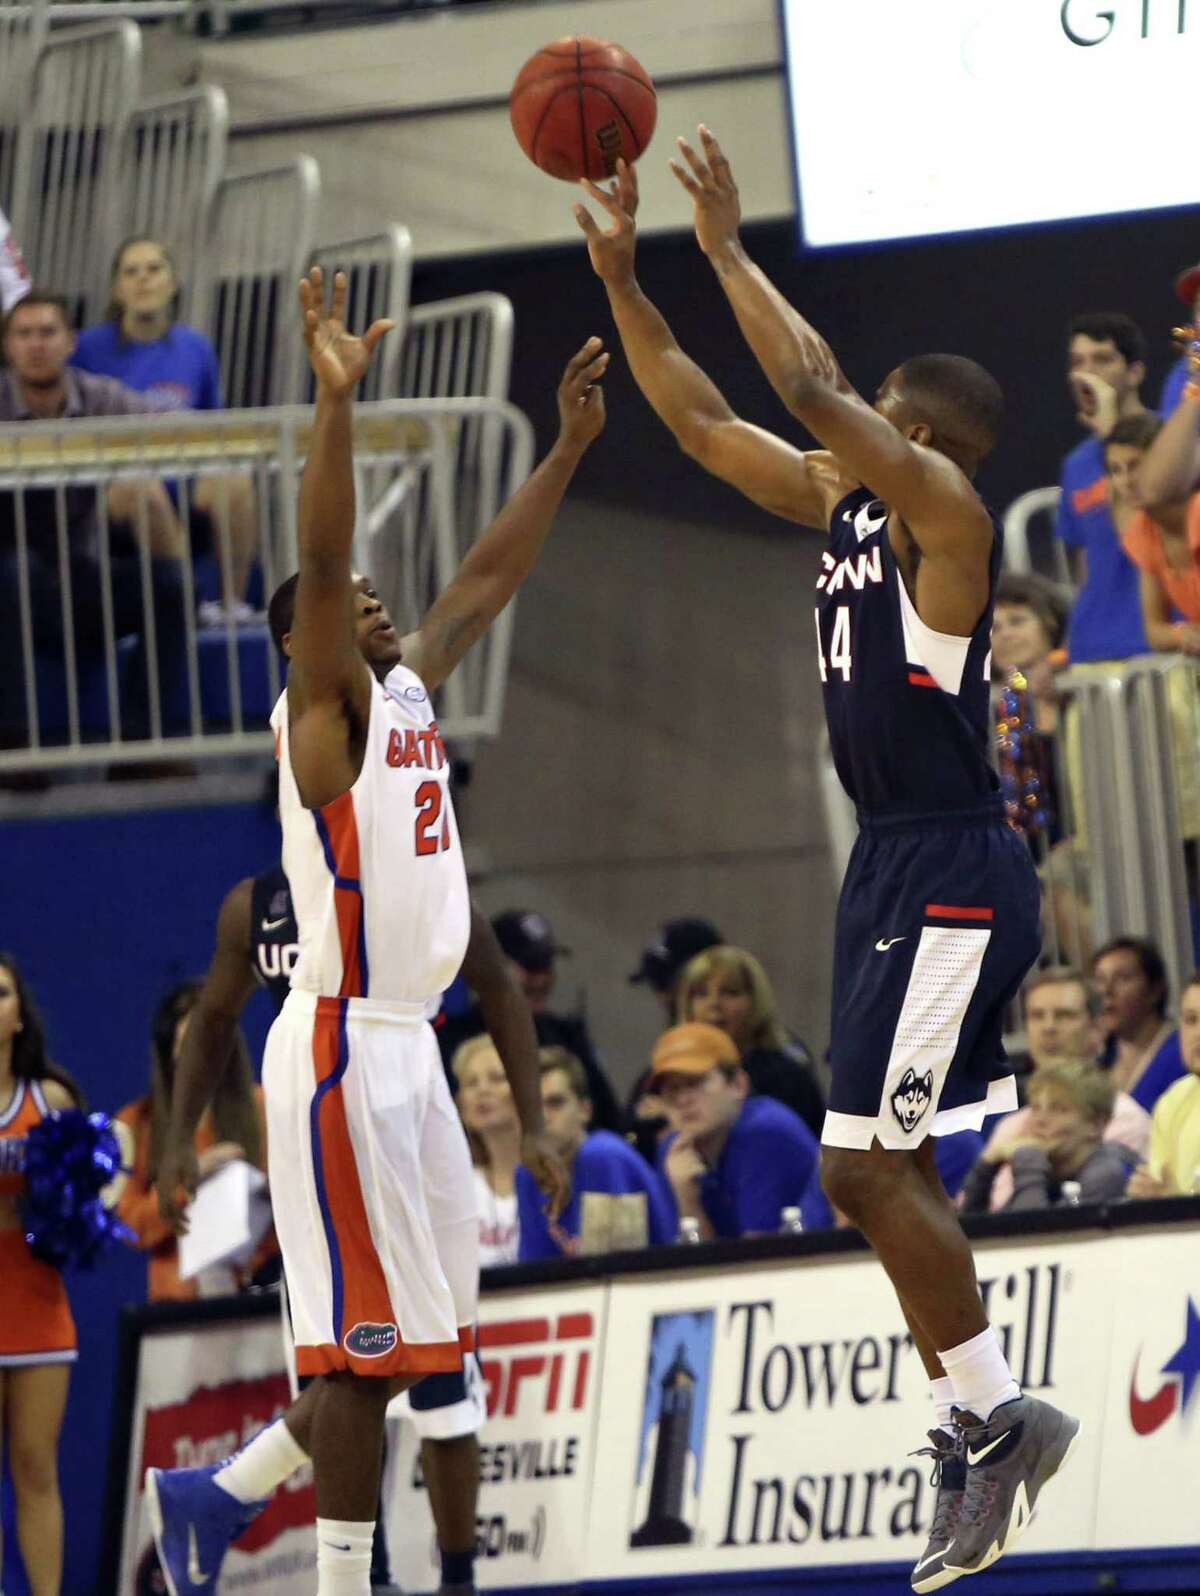 UConn’s Rodney Purvis knocks down a 3-pointer over Florida’s Michael Frazier II late in the second half of the Huskies’ 63-59 win on Saturday in Gainesville, Fla.